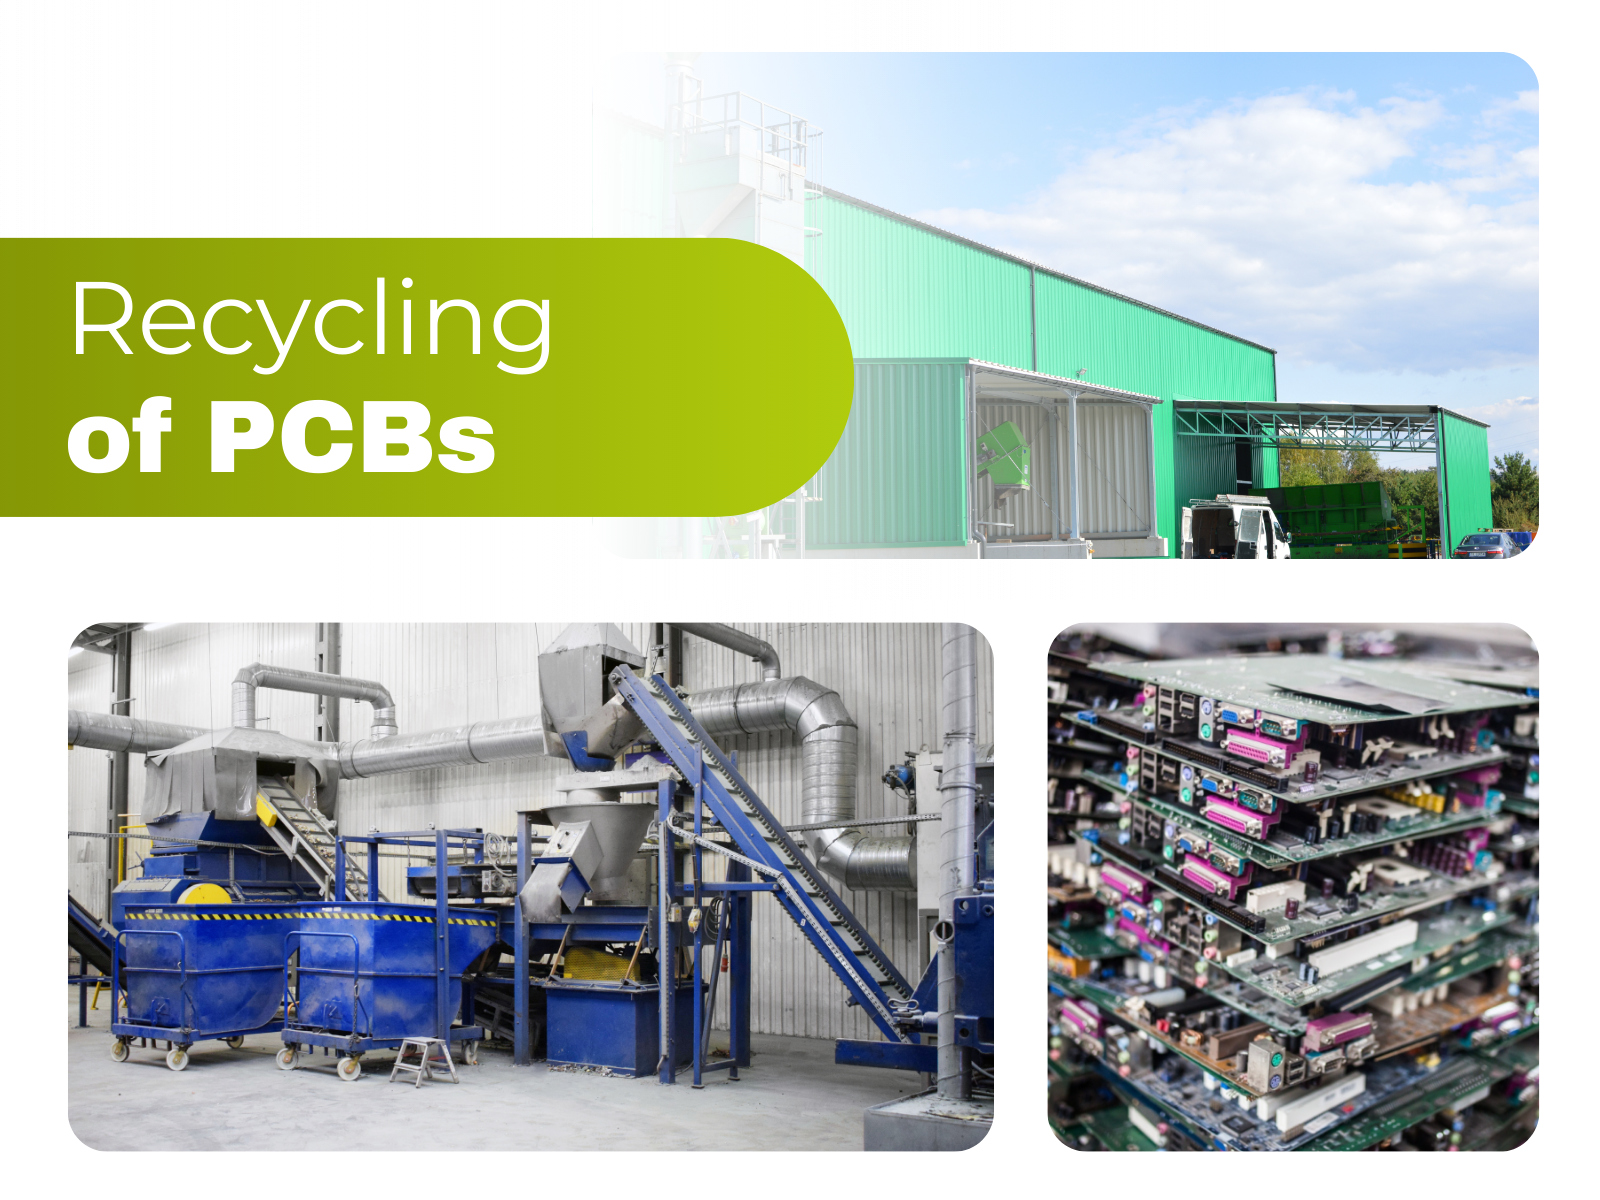 Recycling of PCBs